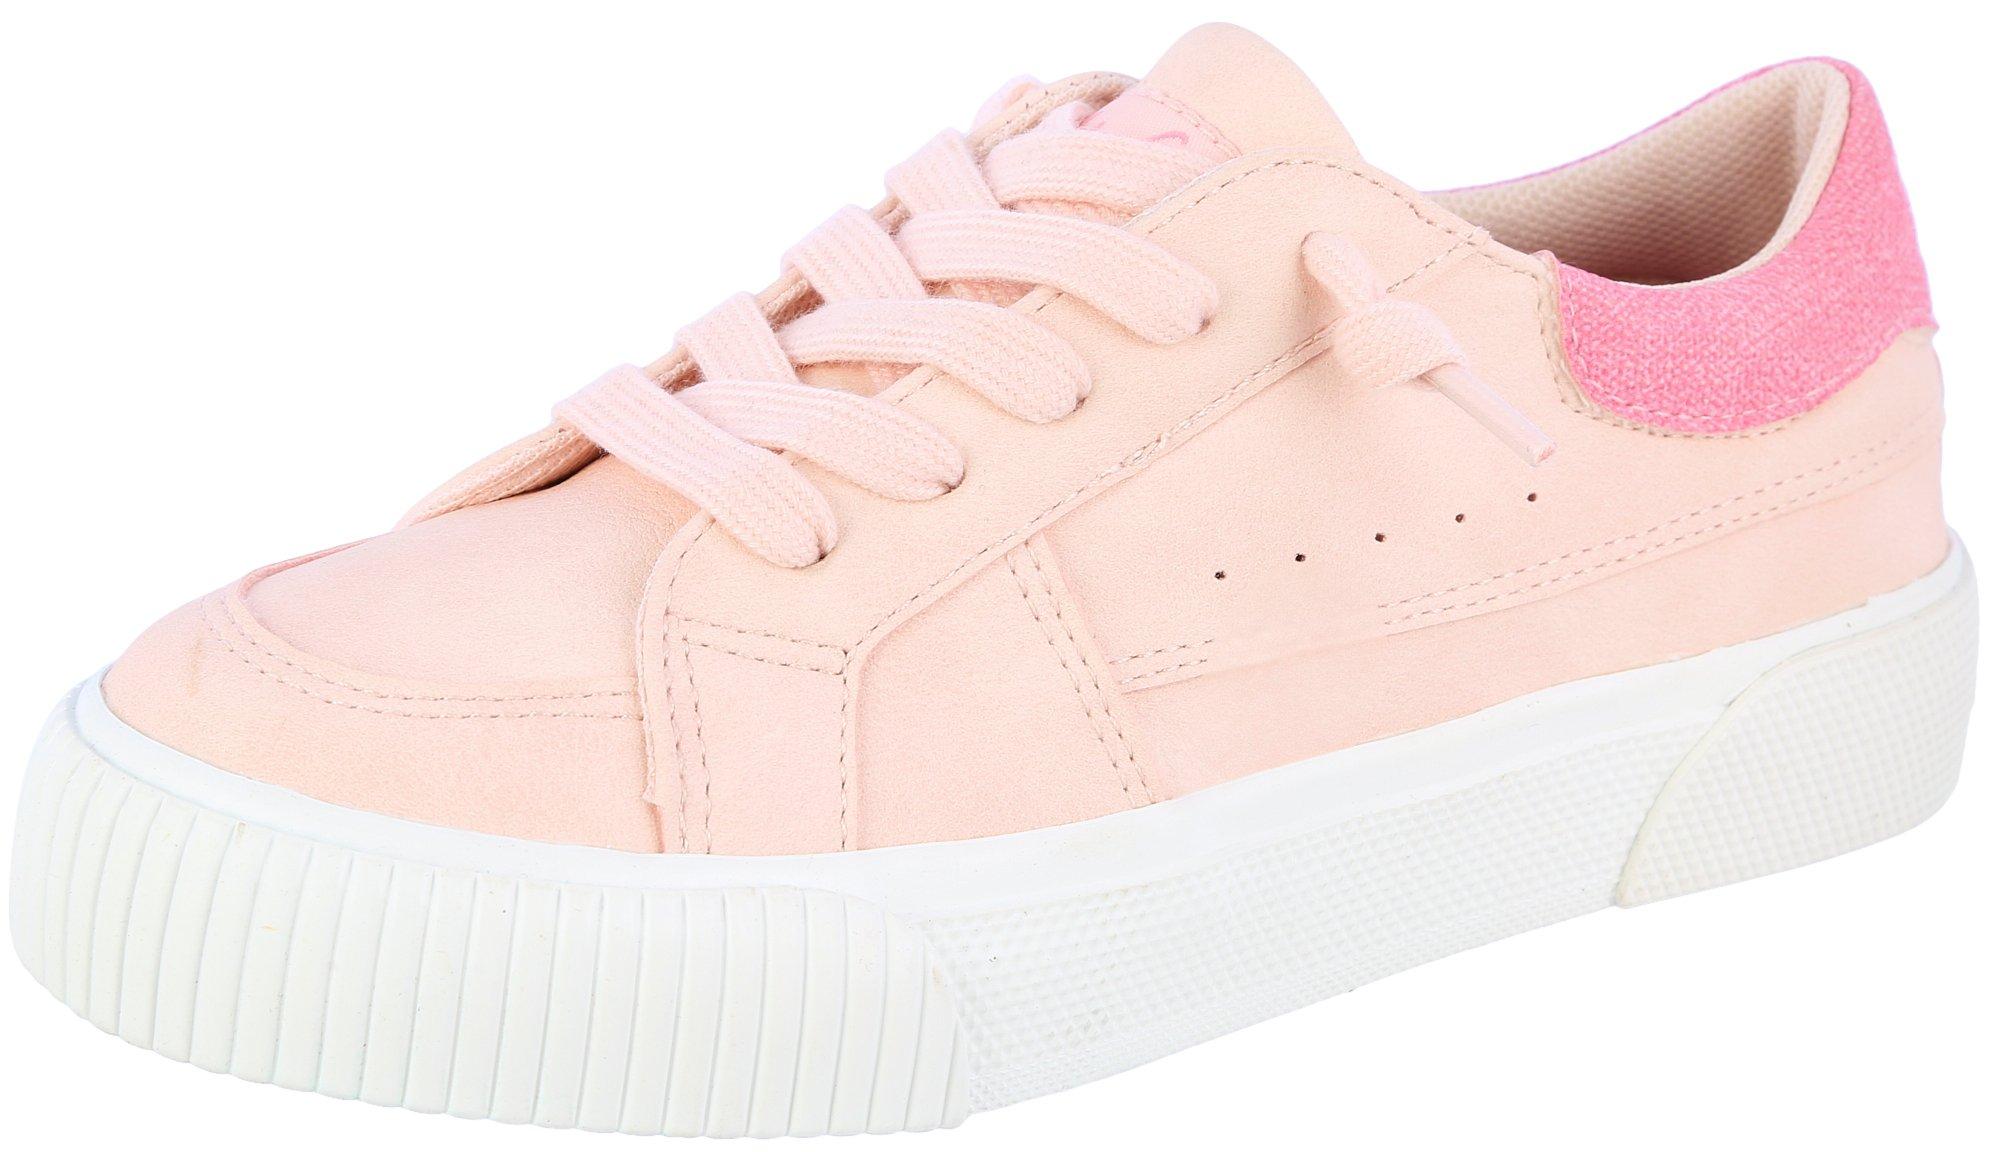 Blowfish Girls Cambria-K Athletic Shoes